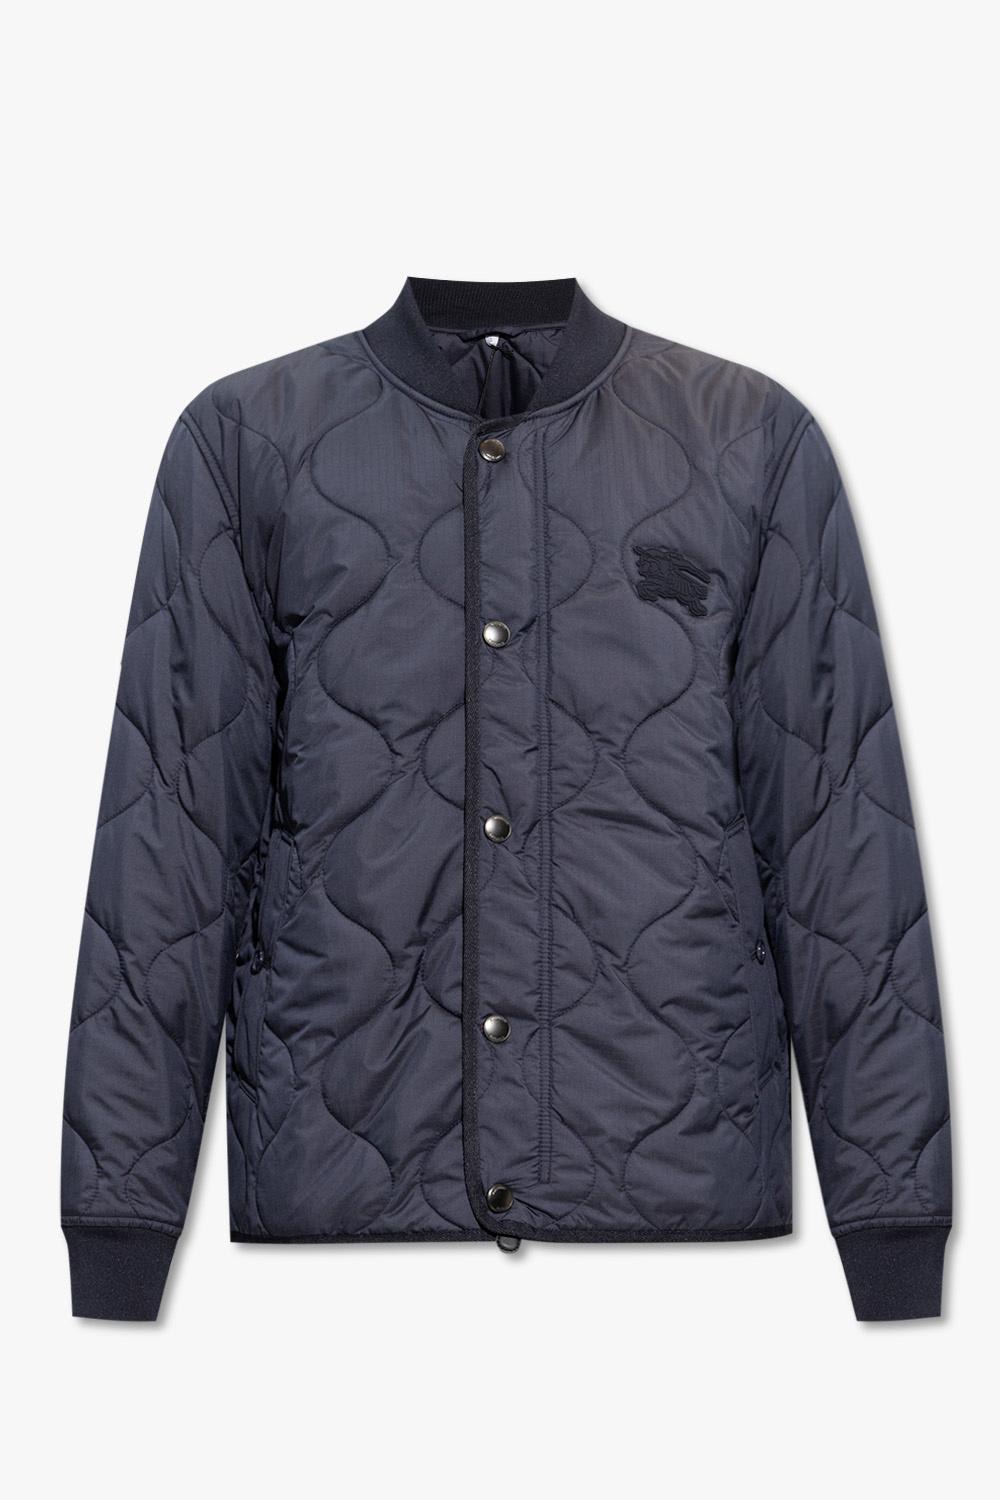 BURBERRY BROADFIELD QUILTED JACKET